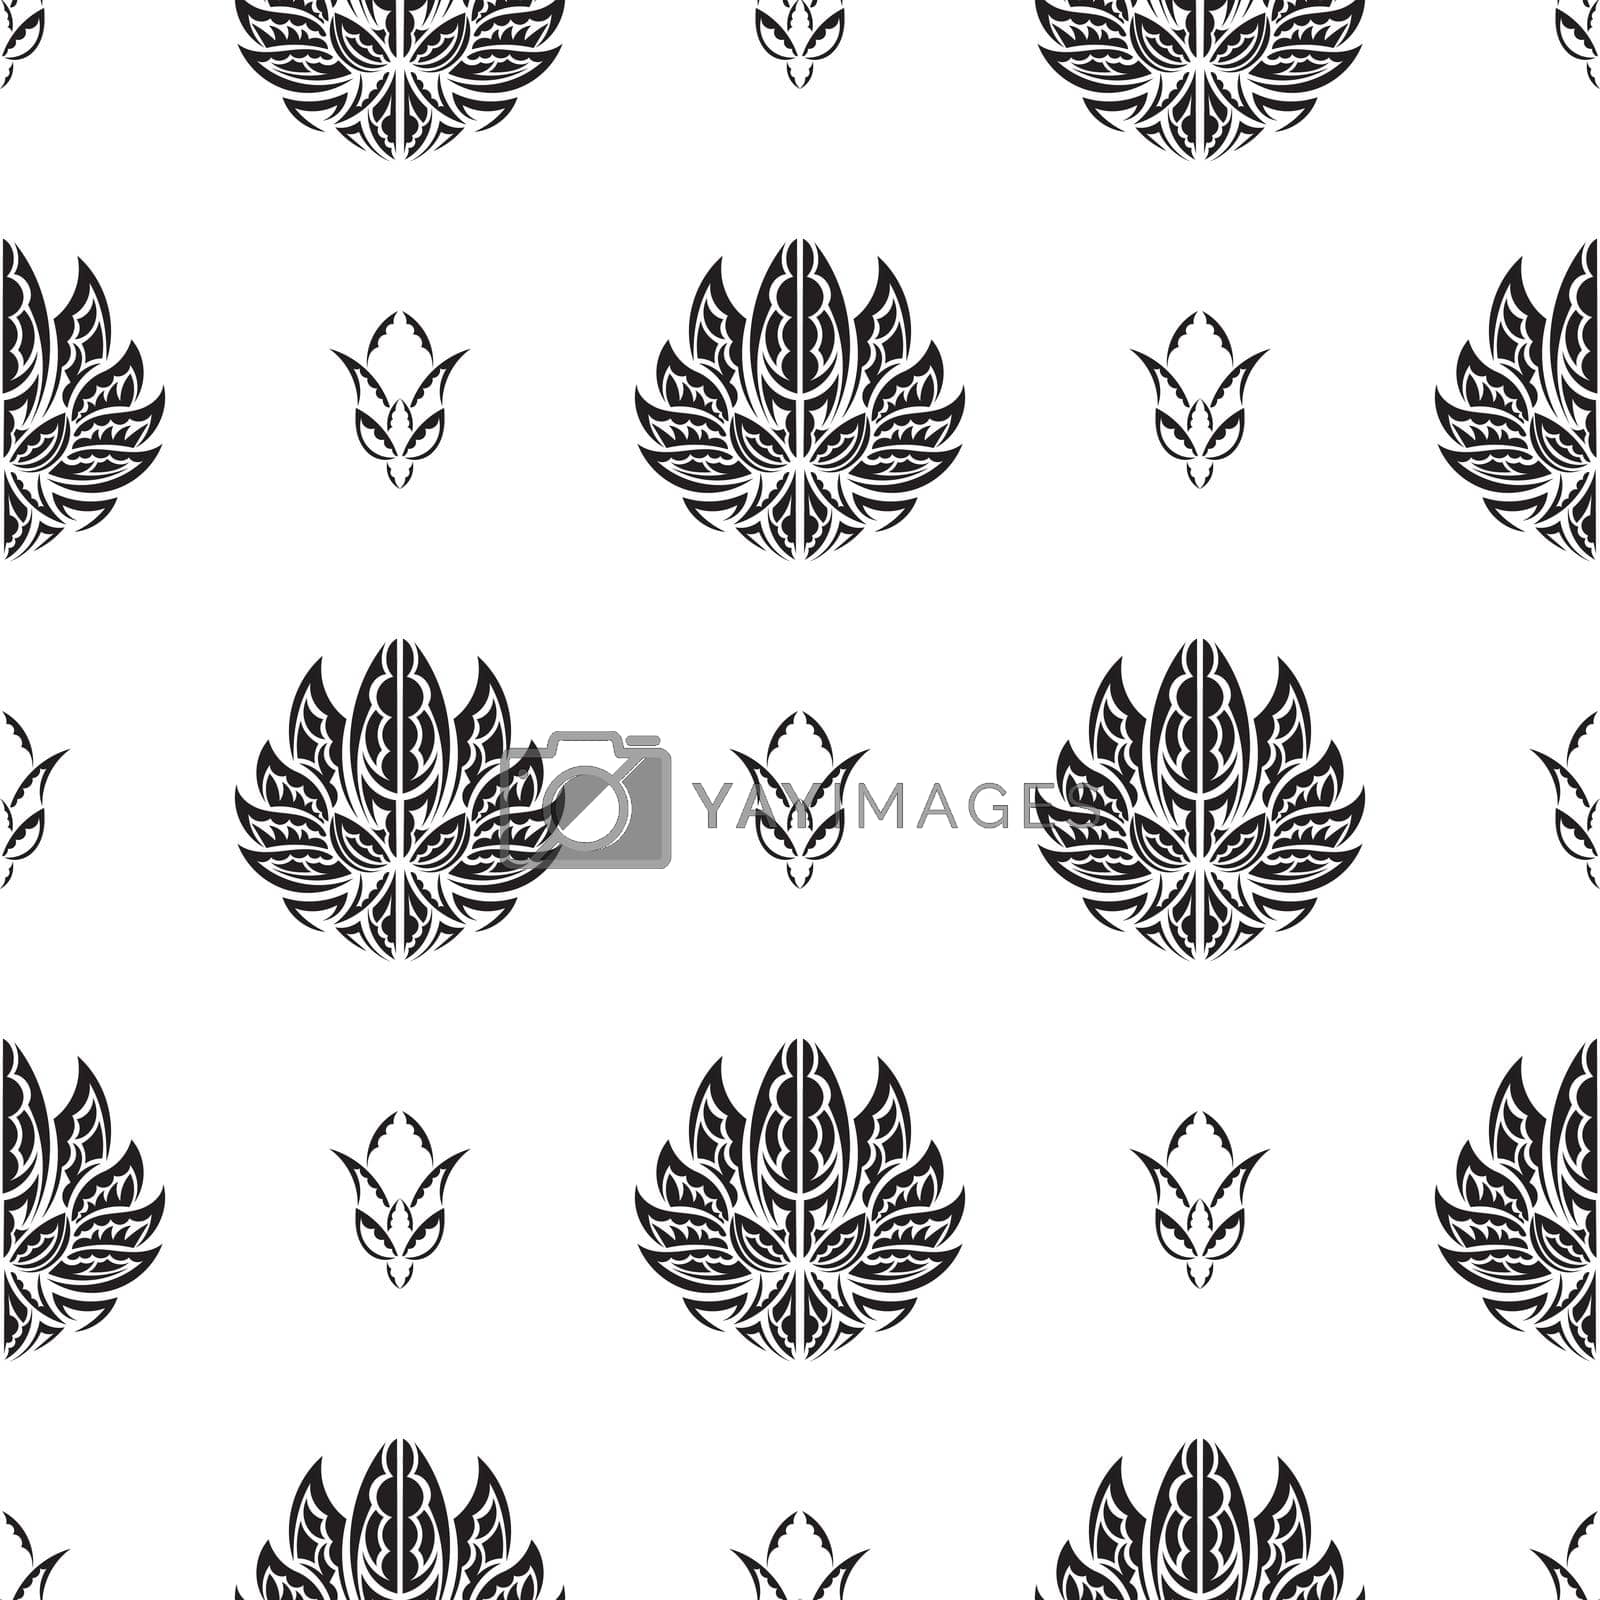 Black-white Seamless pattern with lotuses in Simple style. Good for backgrounds and prints. Vector illustration.